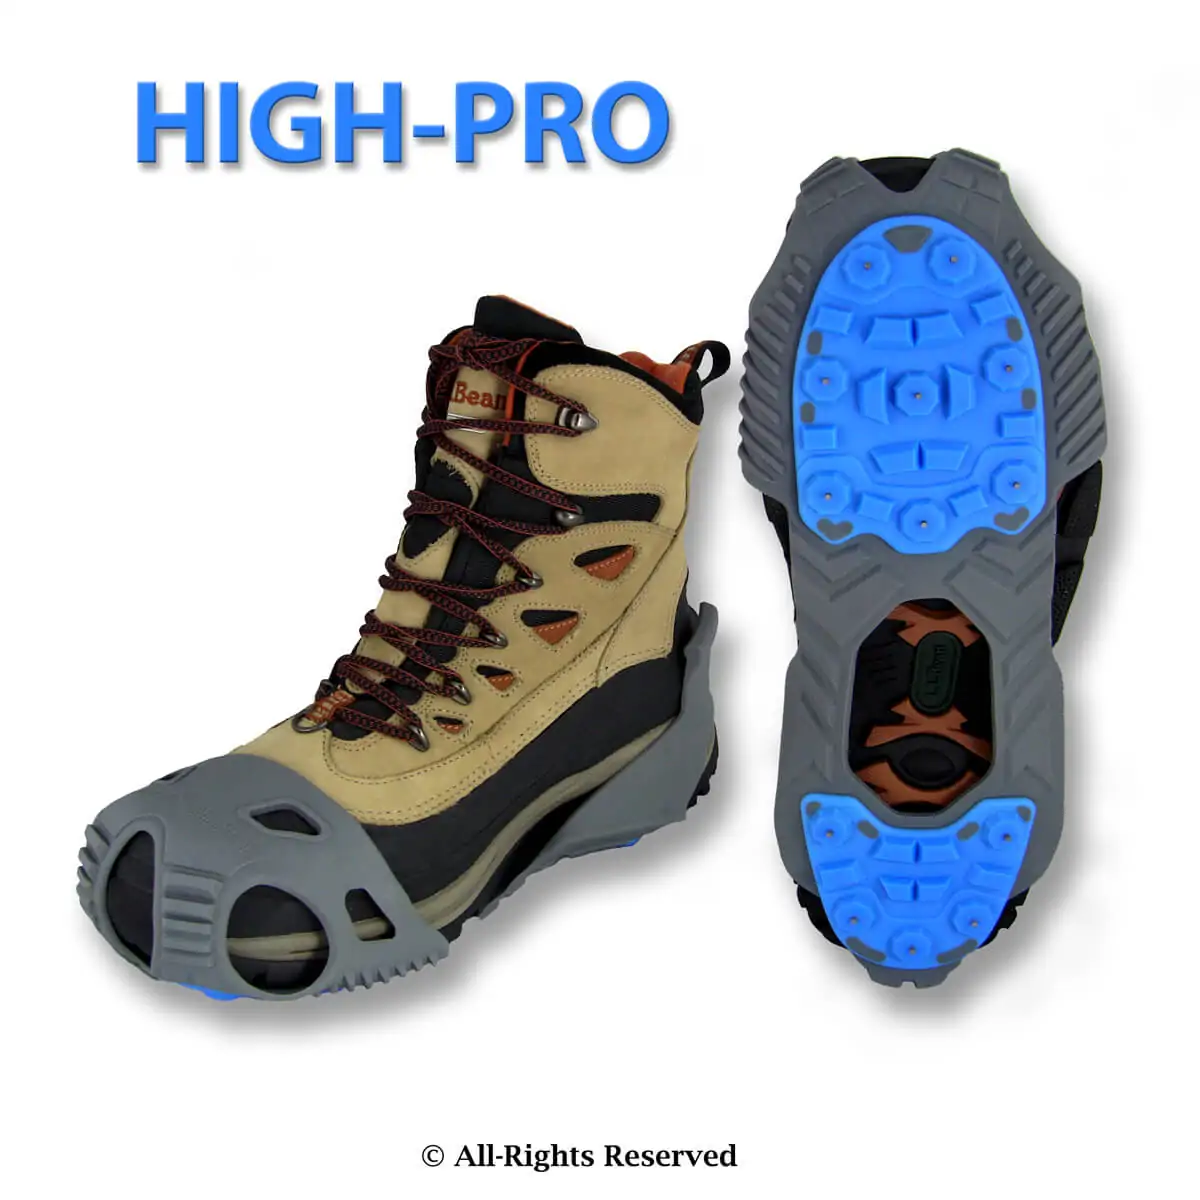 Winter Walking High-Pro Ice Cleat 